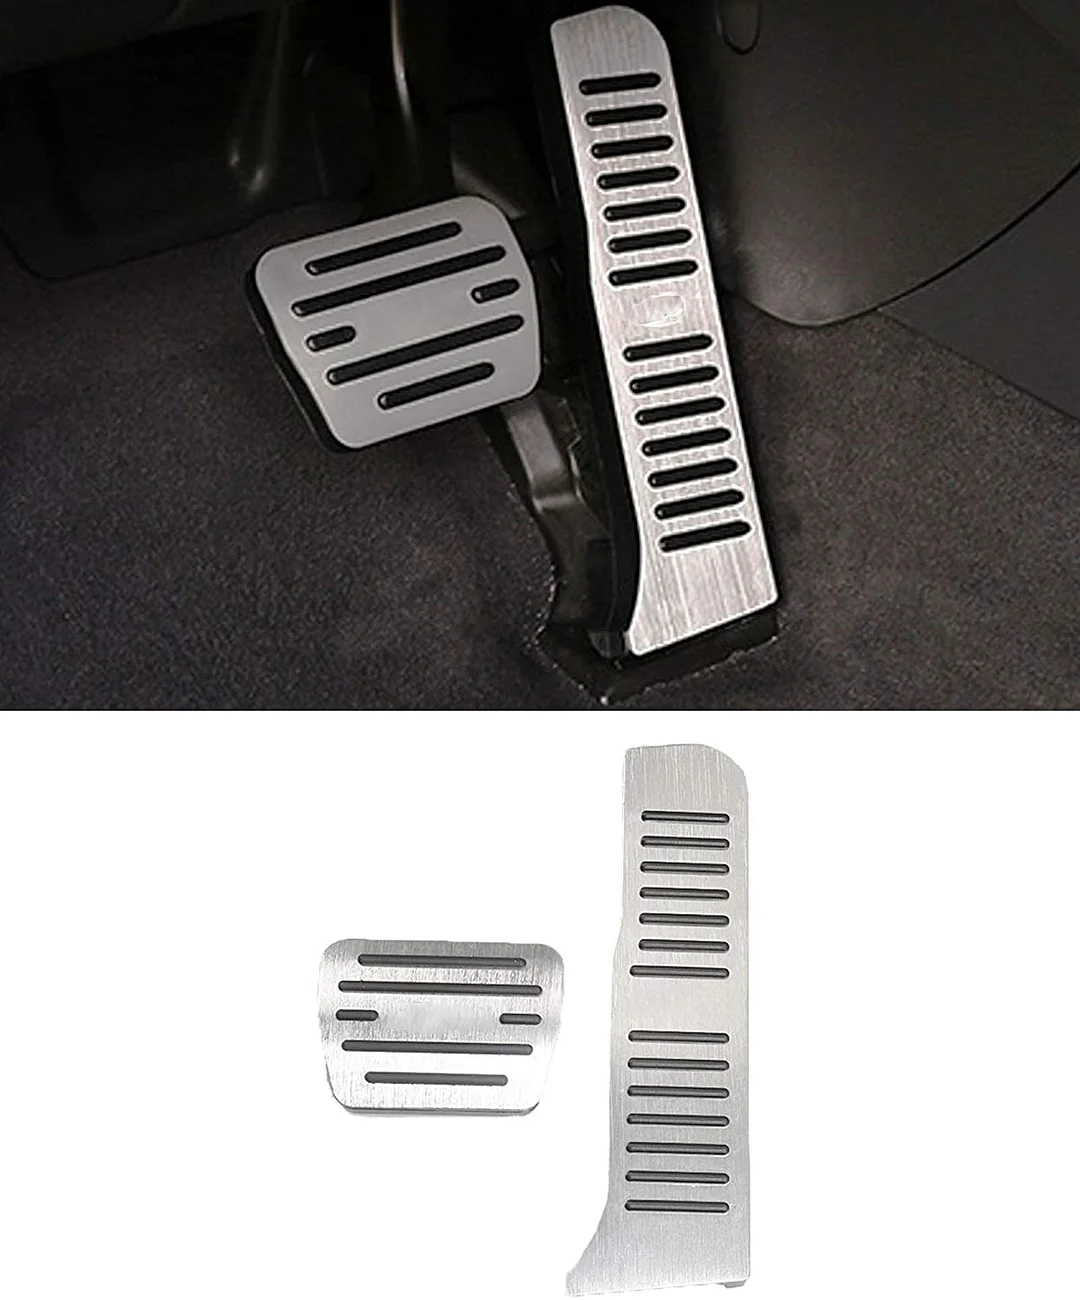 TTCR-II-Pedal-Covers-Compatible-With-Audi-A3-Q3-TT